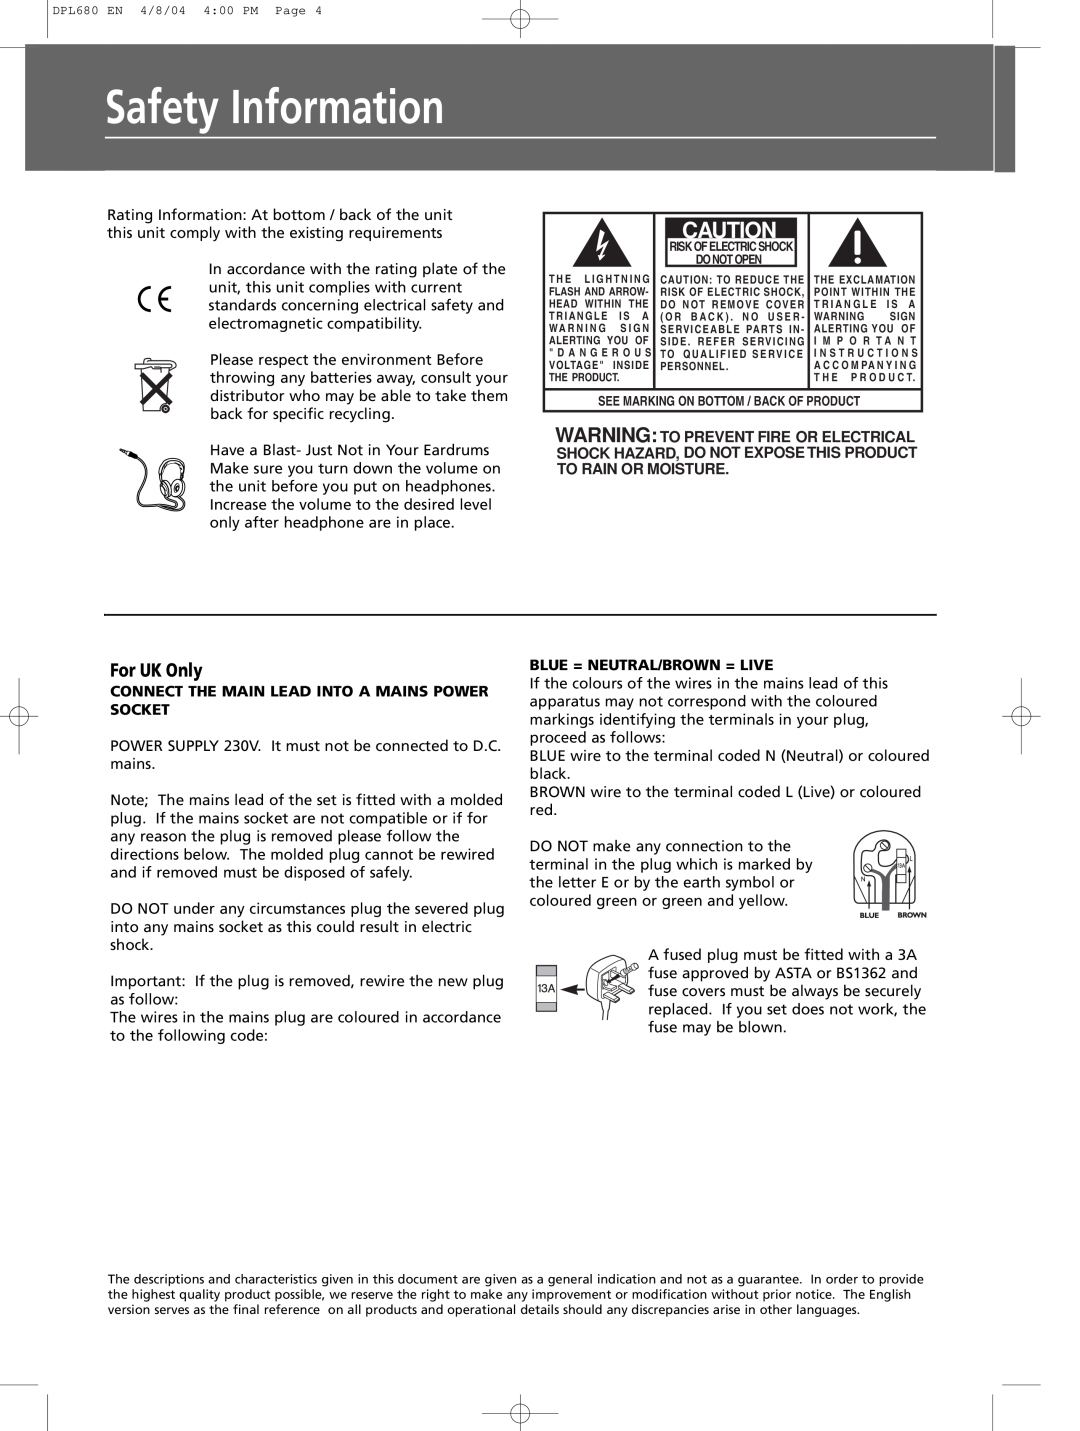 Technicolor - Thomson DPL680 manual Safety Information, For UK Only, Connect The Main Lead Into A Mains Power Socket 